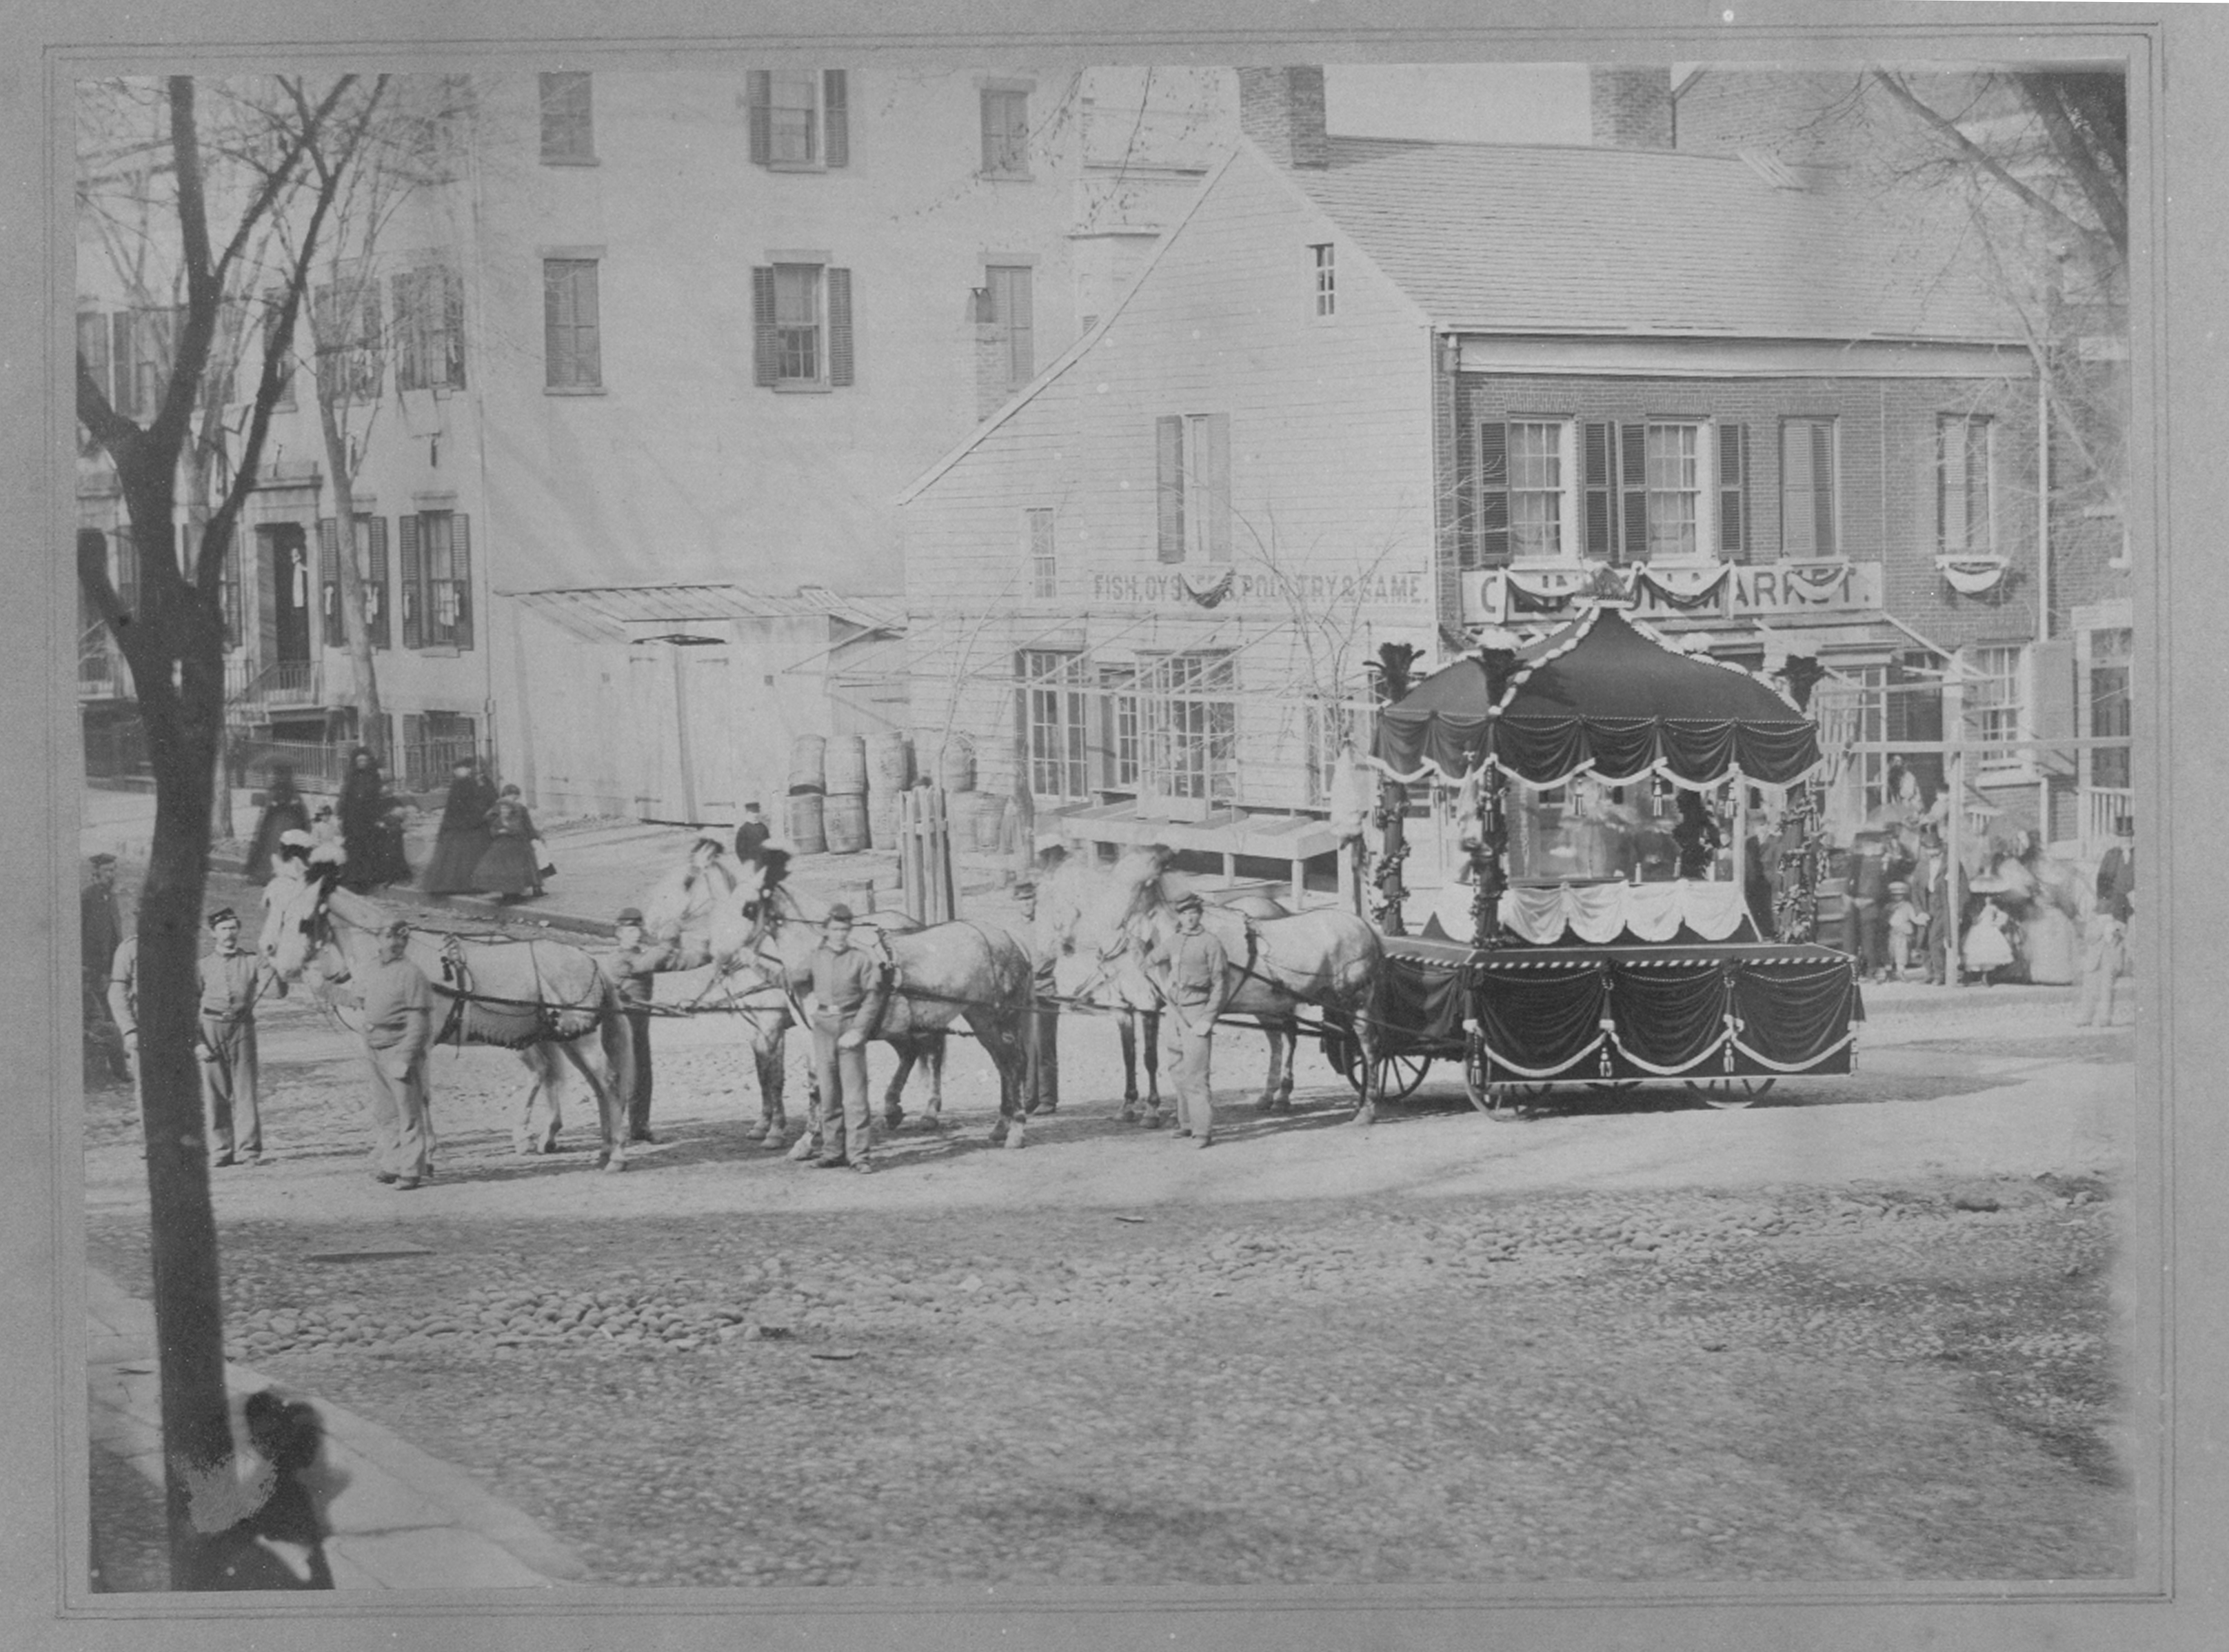 Lincoln's funeral caisson in New York, May 1865 (Gilder Lehrman Collection)